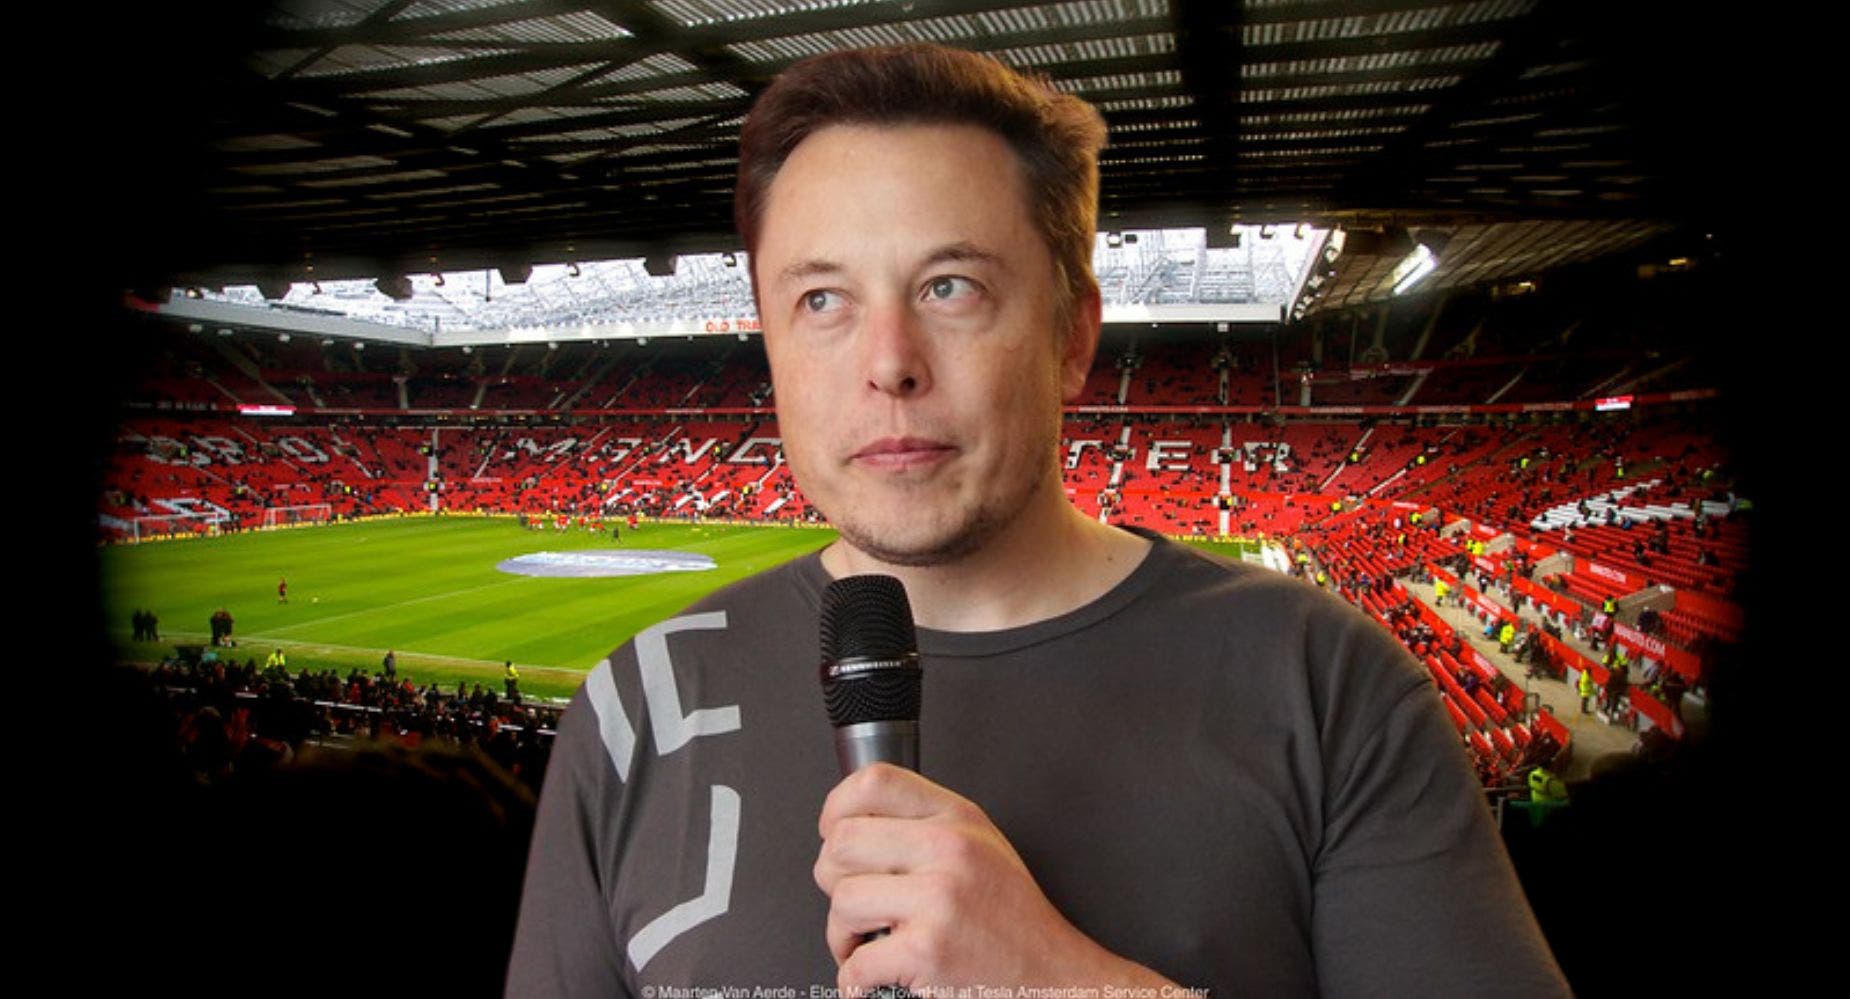 Is Elon Musk Joking? Why Manchester United Stock Is Rising Today